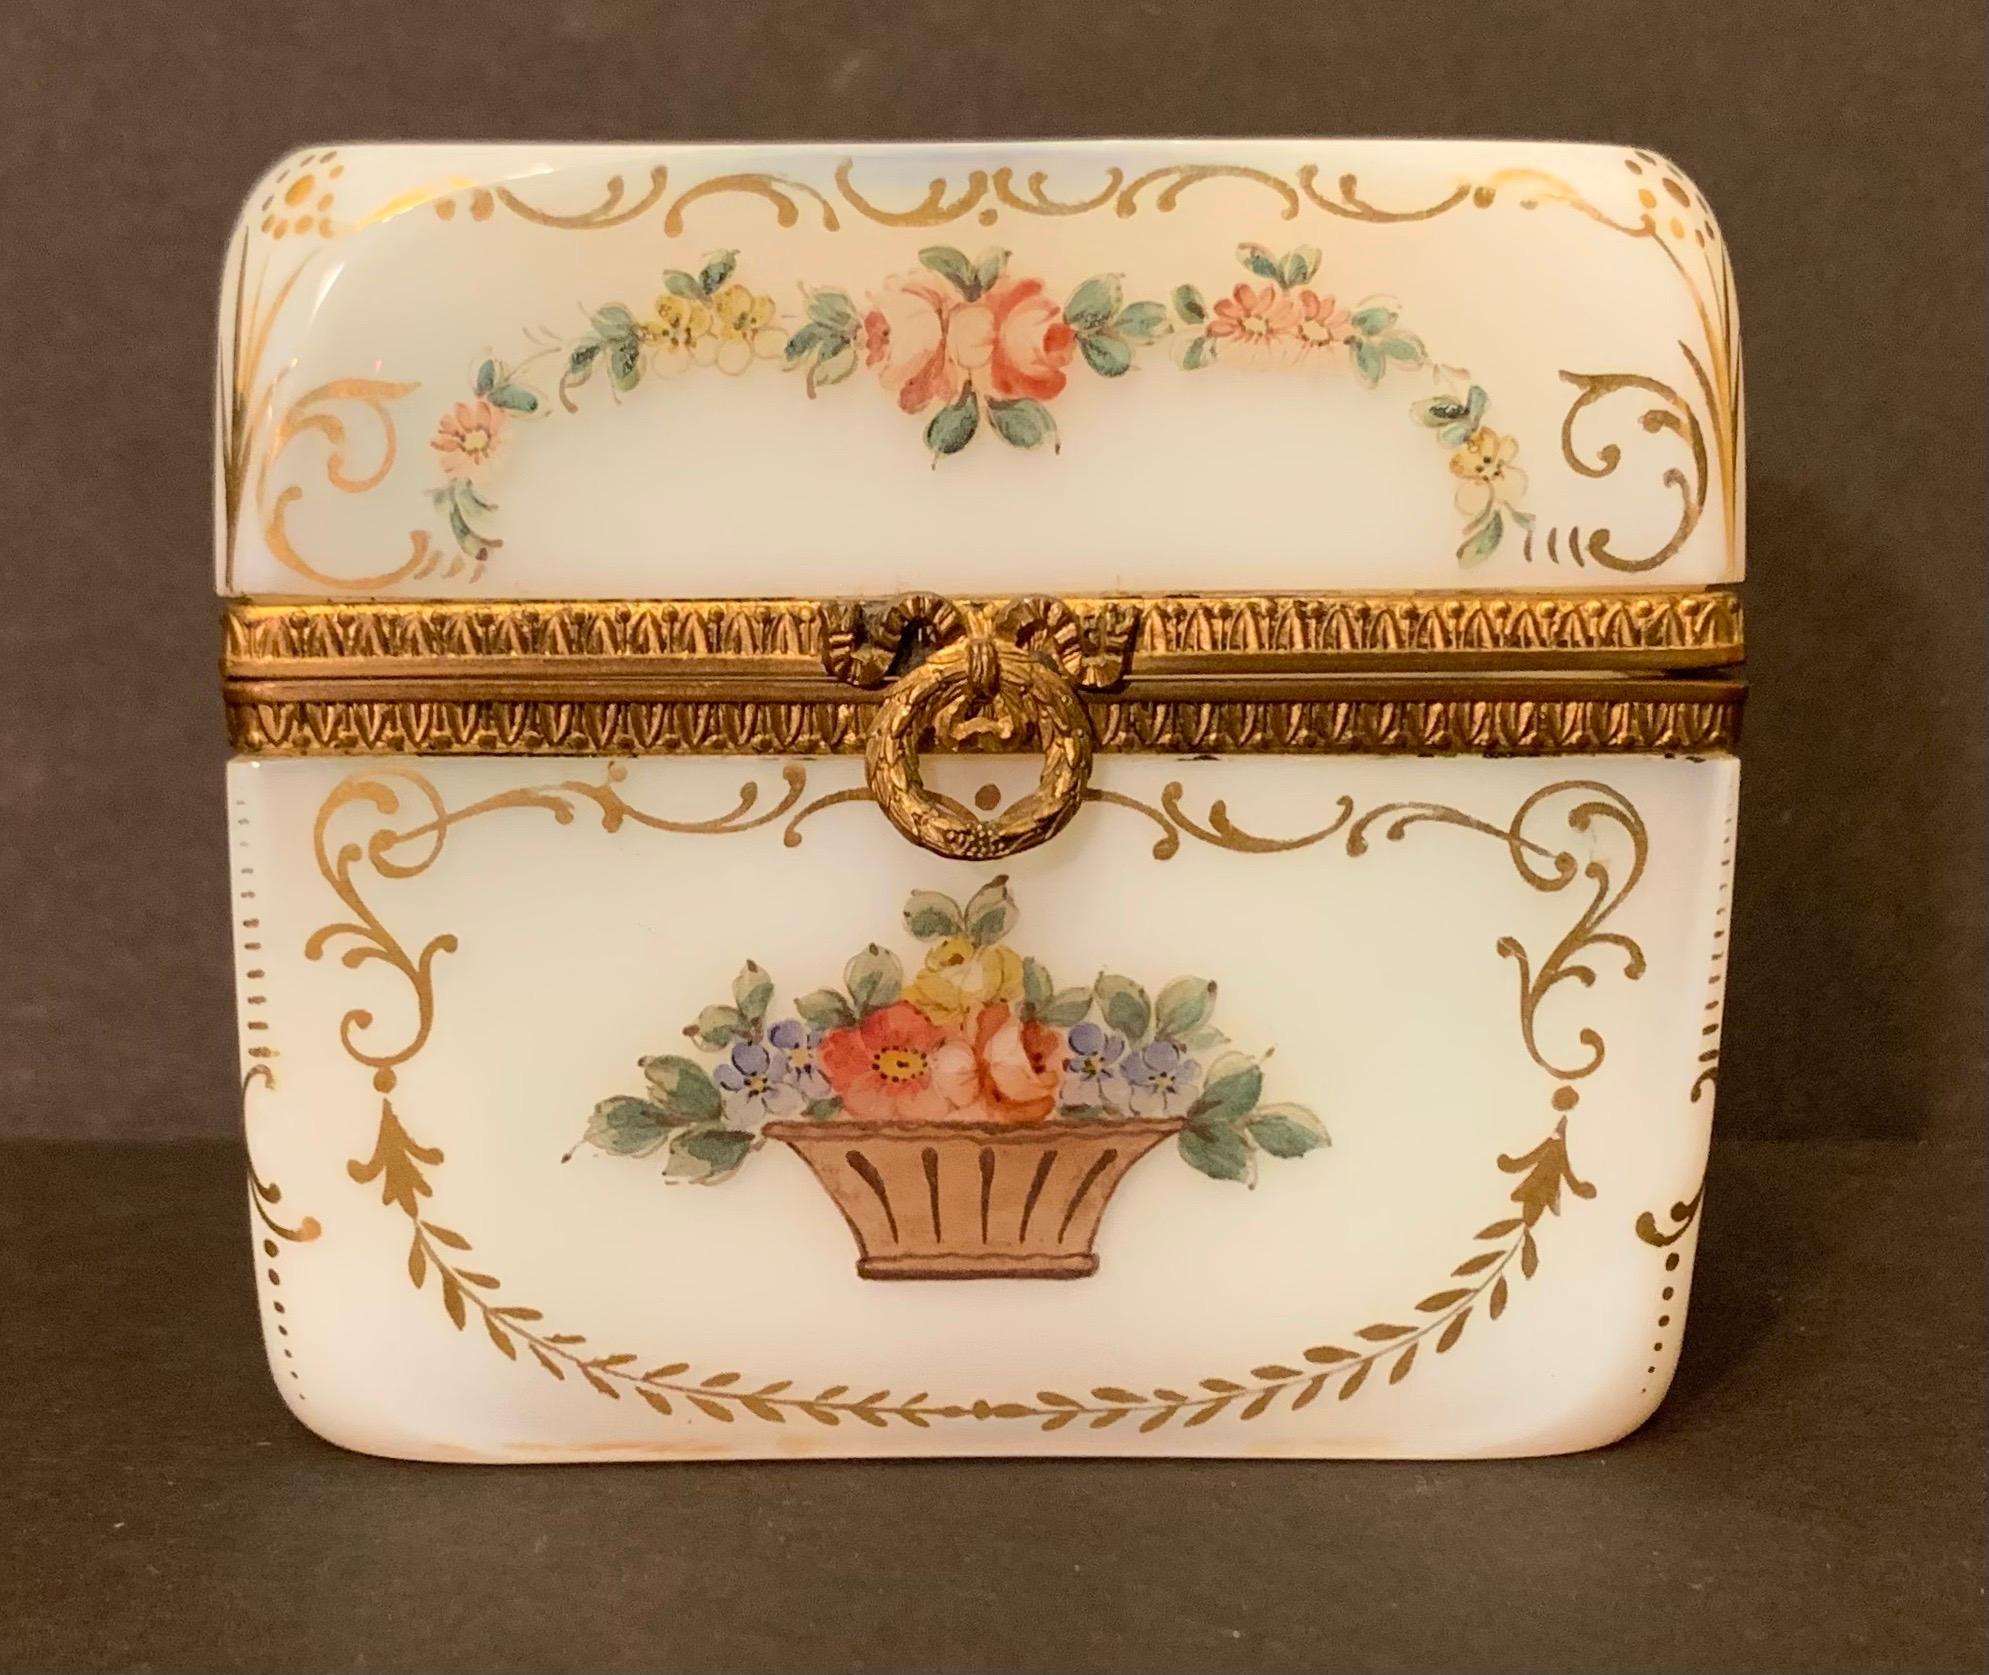 A wonderful French white opaline glass with ormolu bronze mounts and hand painting on all sides as well as the top, jewelry / vanity box.
 